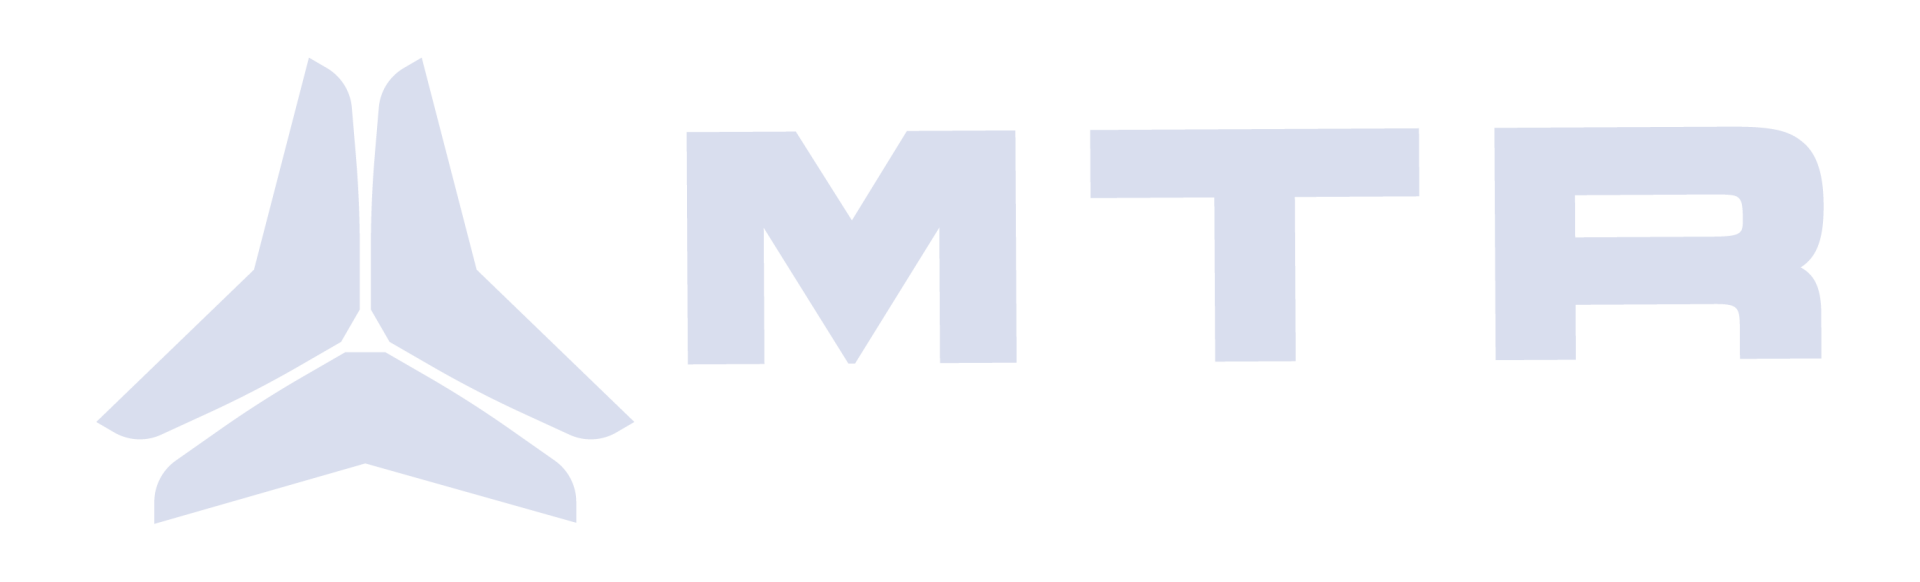 New logo wanted for mtr travel | Logo design contest | 99designs